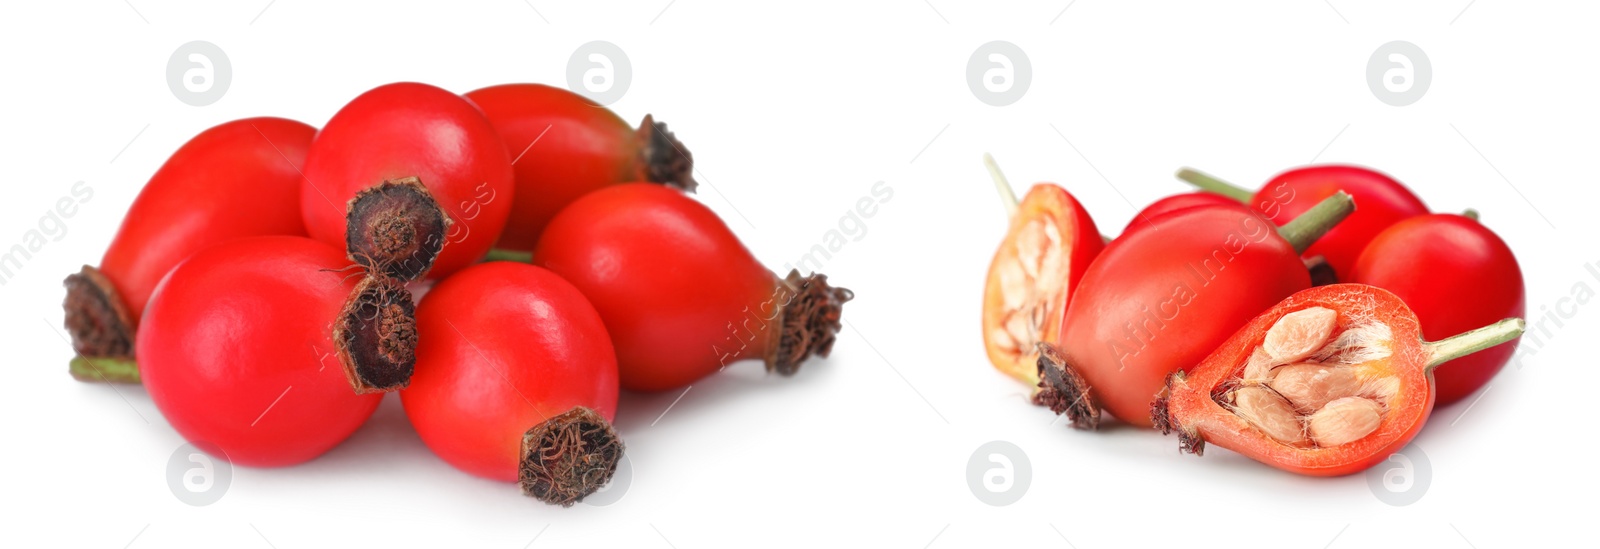 Image of Ripe rose hip berries on white background, collage. Banner design